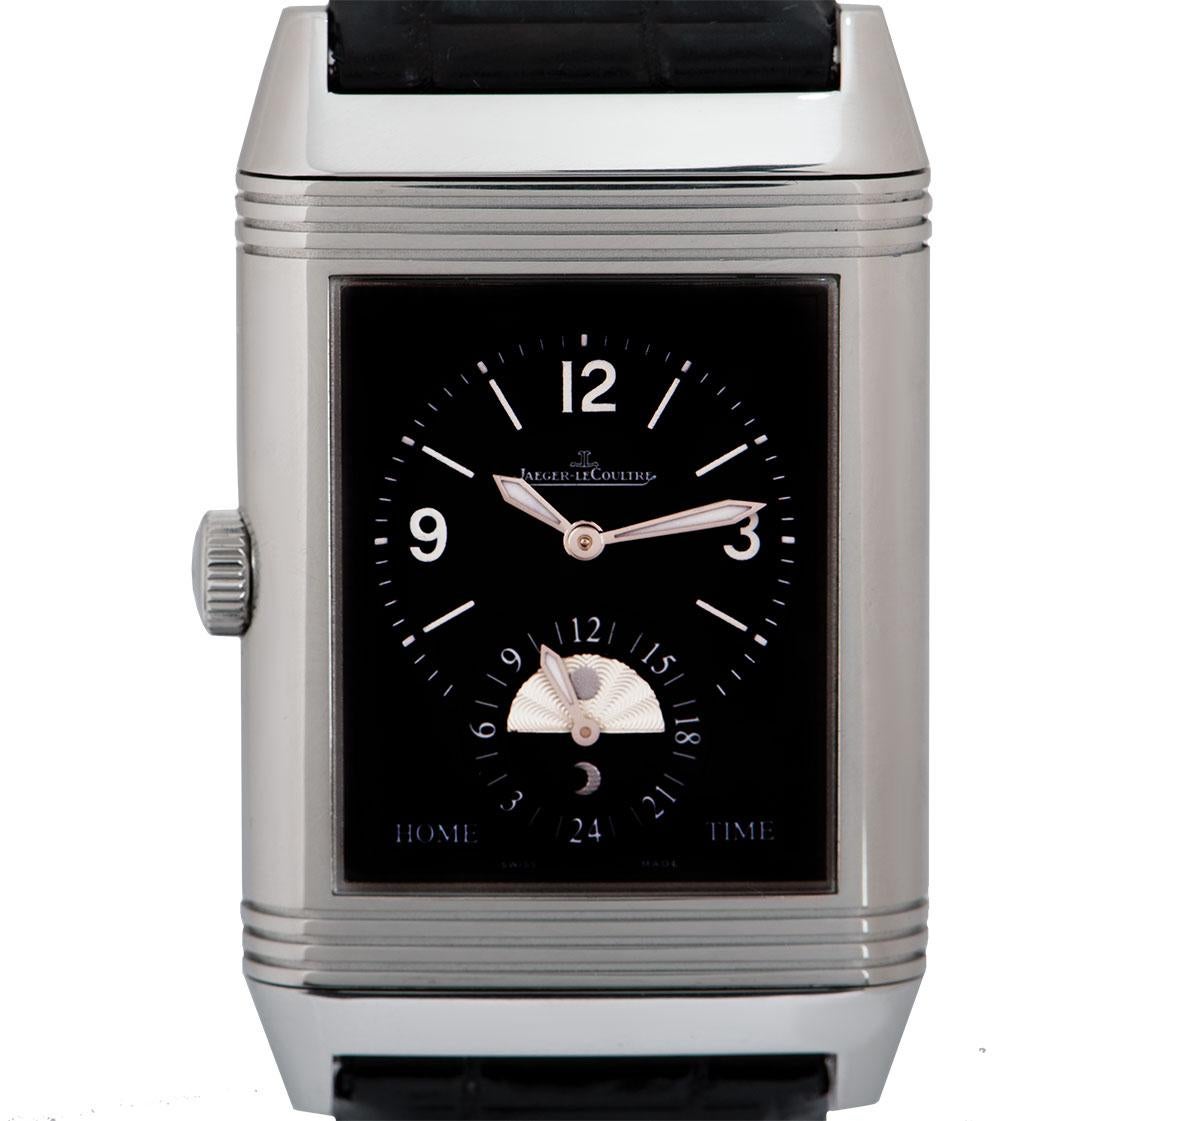 A 32 mm Limited Edition Stainless Steel Grande Reverso Duodate Gents Wristwatch, silver dial with arabic numbers, small seconds at 6 0'clock, date at 12 0'clock, blued steel hands, reverse black dial hour markers and arabic numbers 3, 9 & 12, day &